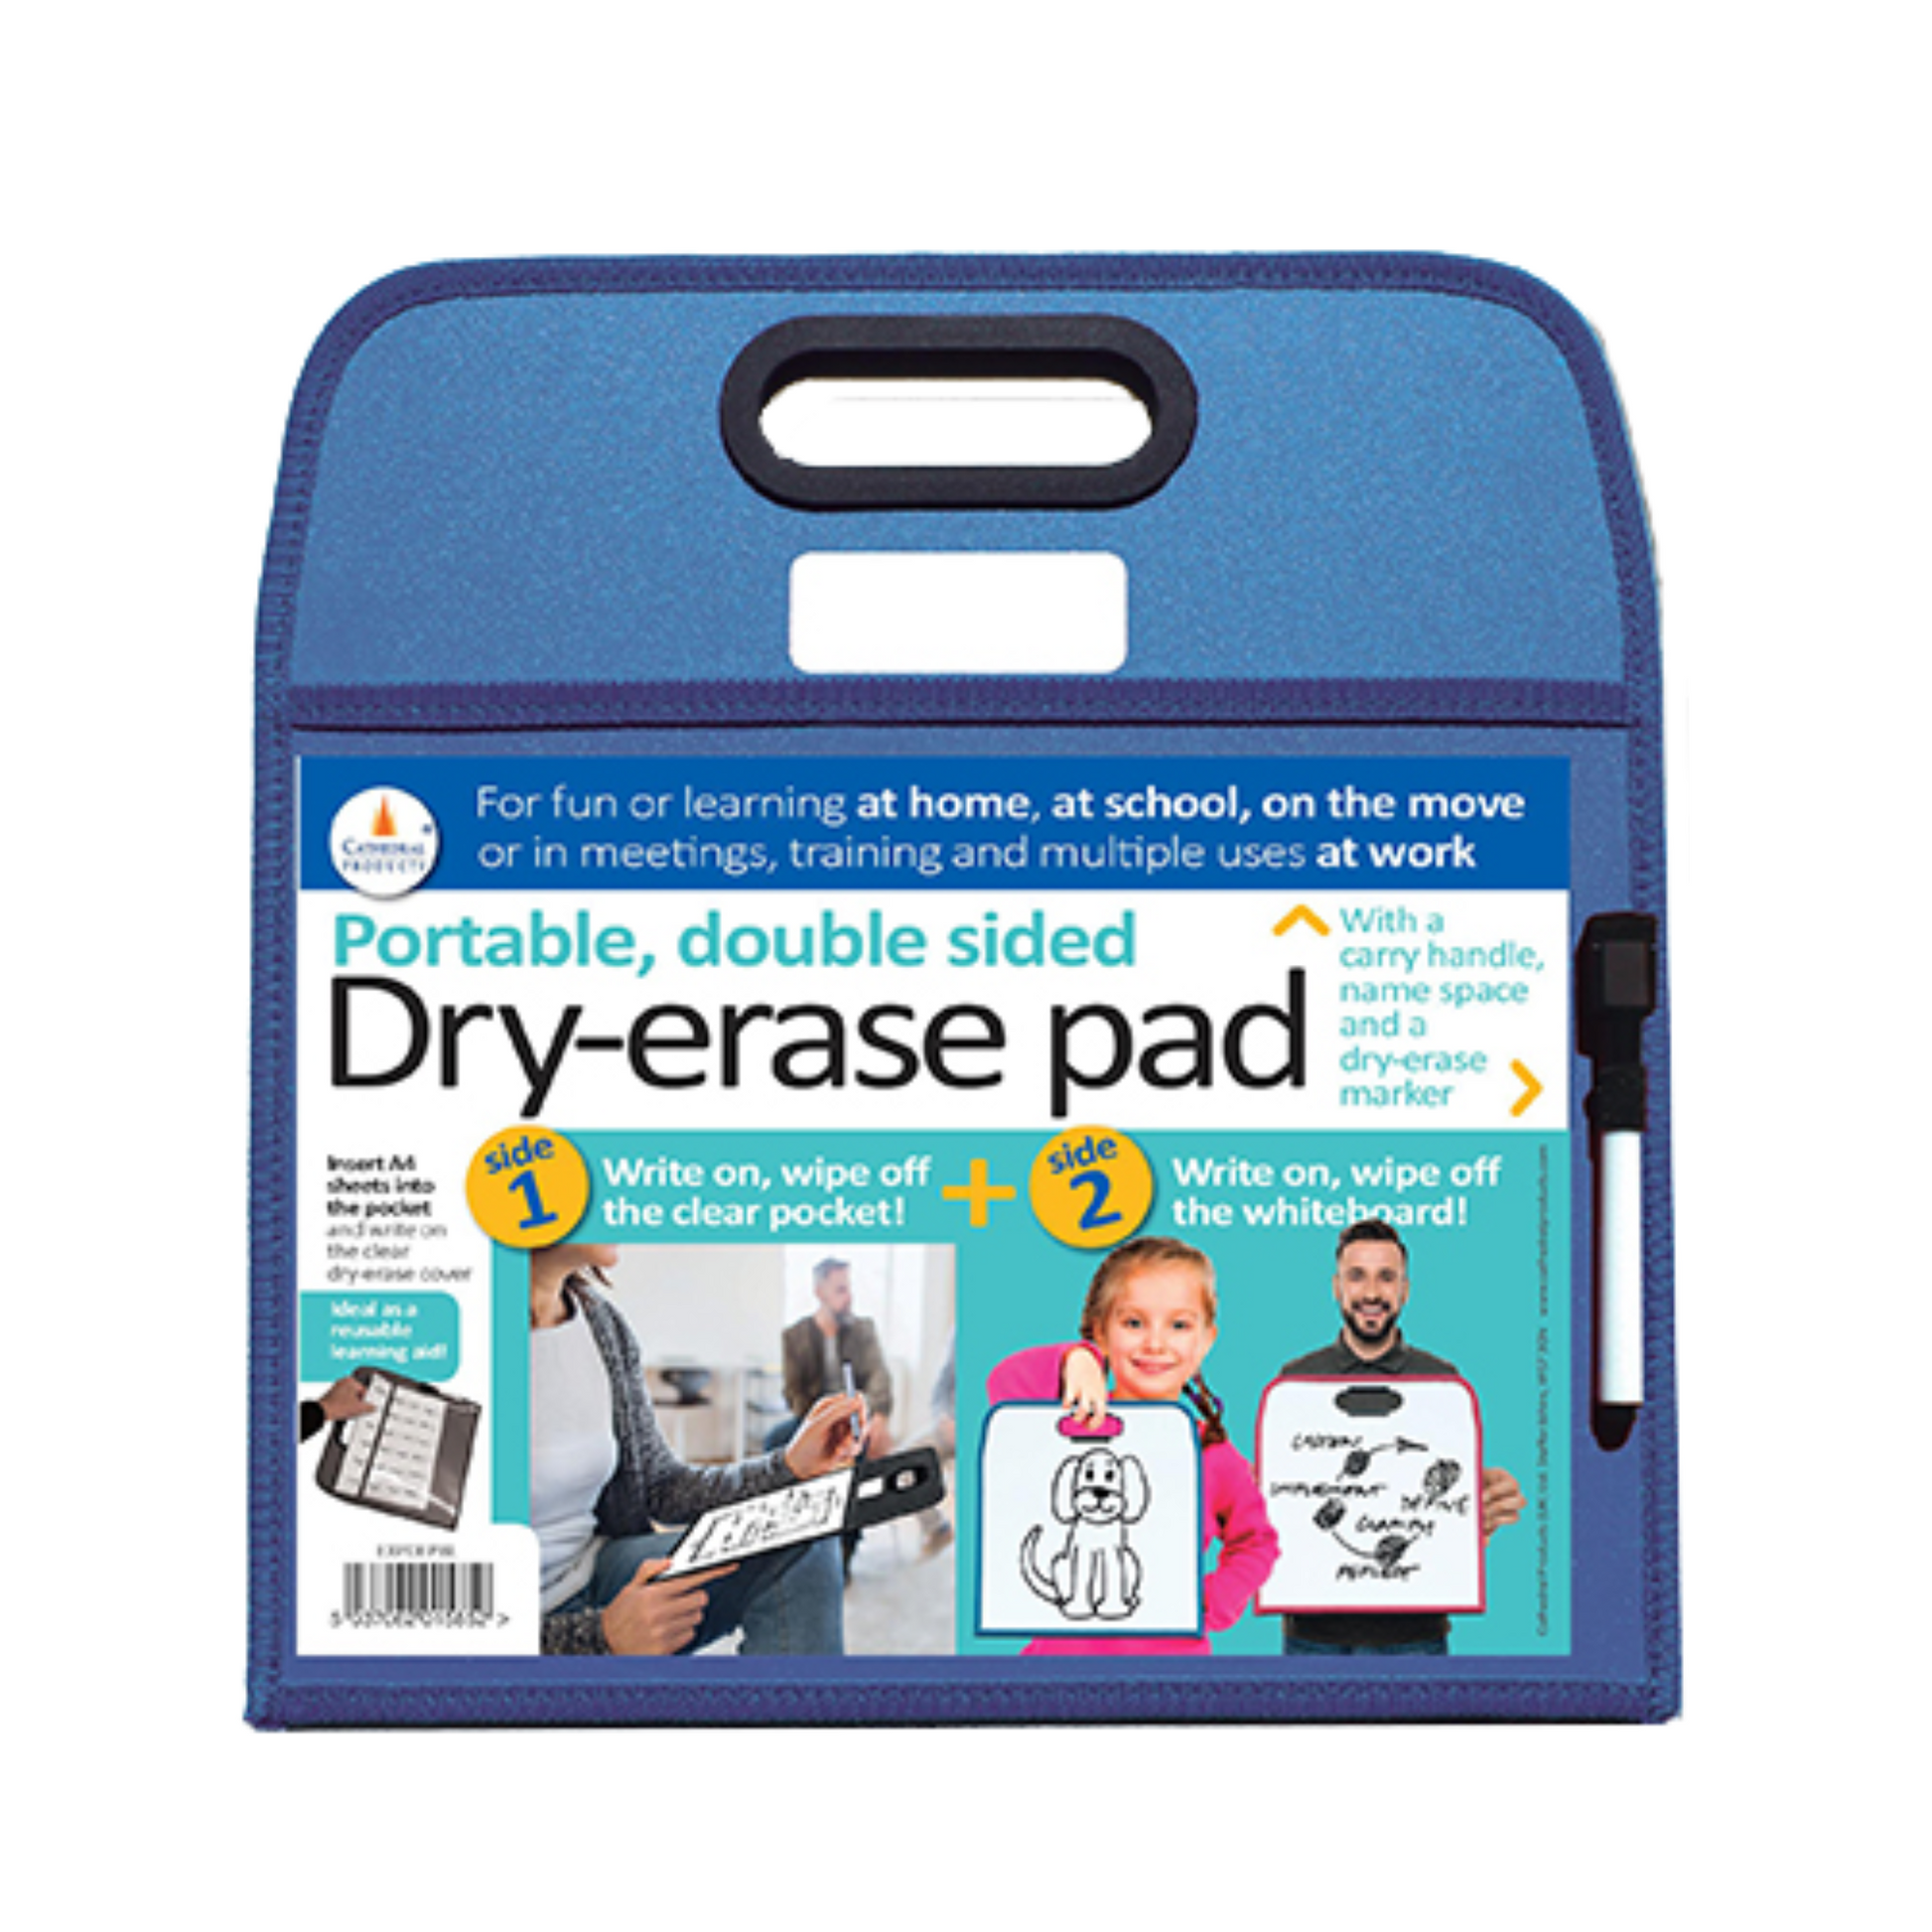 Portable, double-sided blue dry-erase pad with a carry handle, designed for versatile use at home, school, or work. The pad includes a clear pocket on one side and a whiteboard on the other, with packaging insert showing a person holding the pad and a child's drawing of a dog. There is an elastic loop on the right hand side of the board, with a dry erase pen, with a small eraser on the cap.